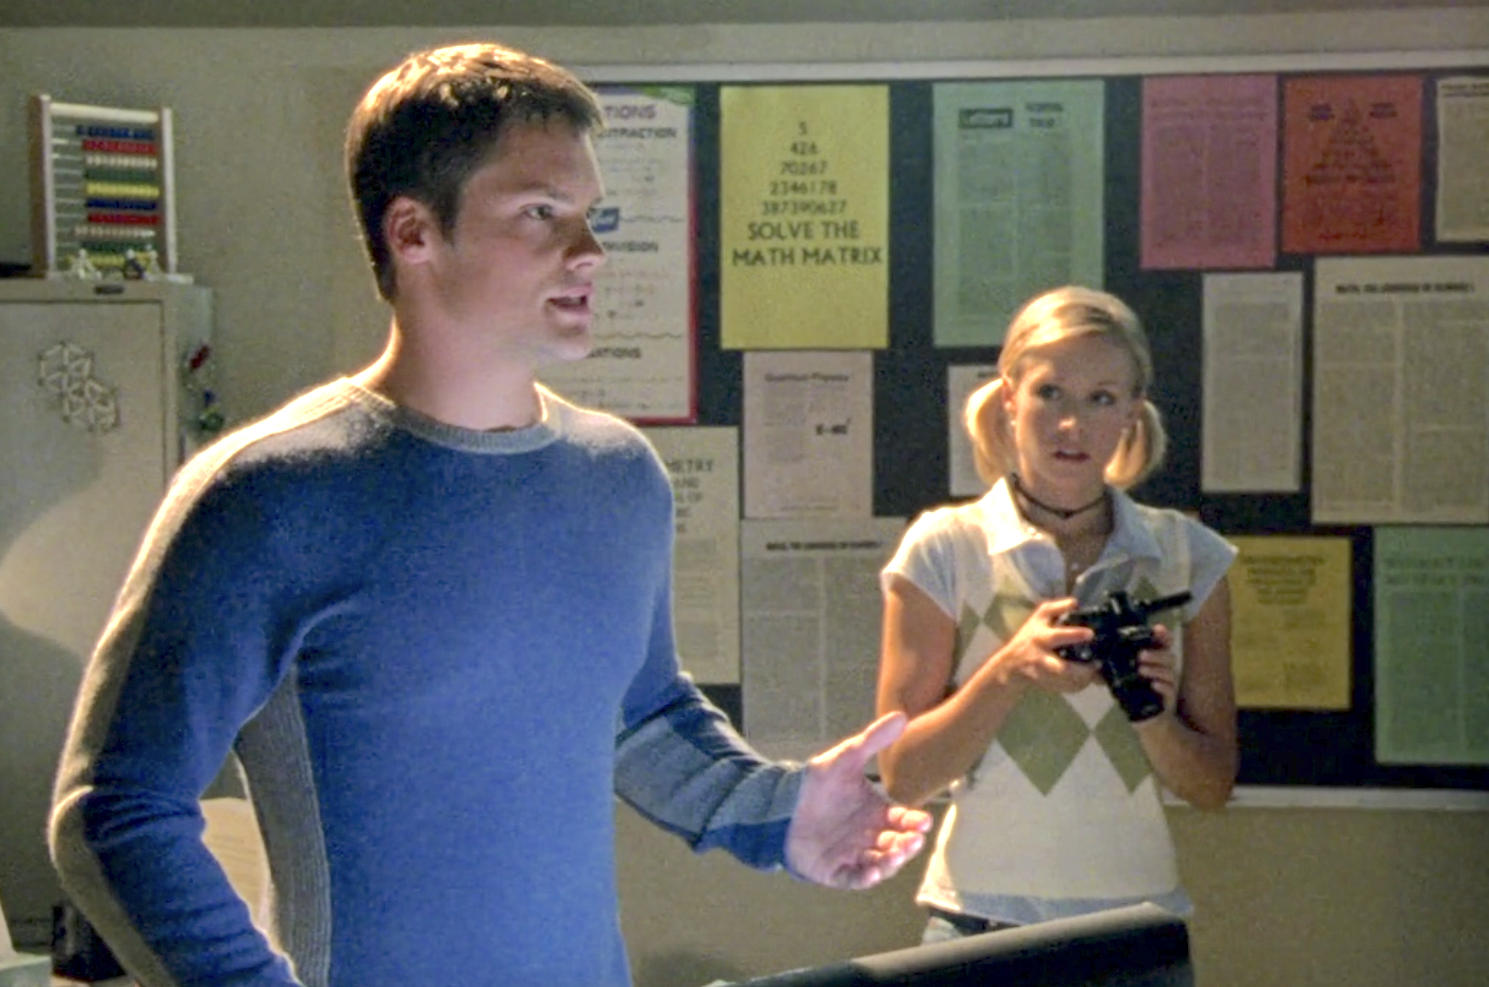 Screenshot of S1E6 of Veronica Mars. Duncan is standing at a lectern in a blue sweater giving a speech. Veronica is standing next to him with a camera watching the speech.